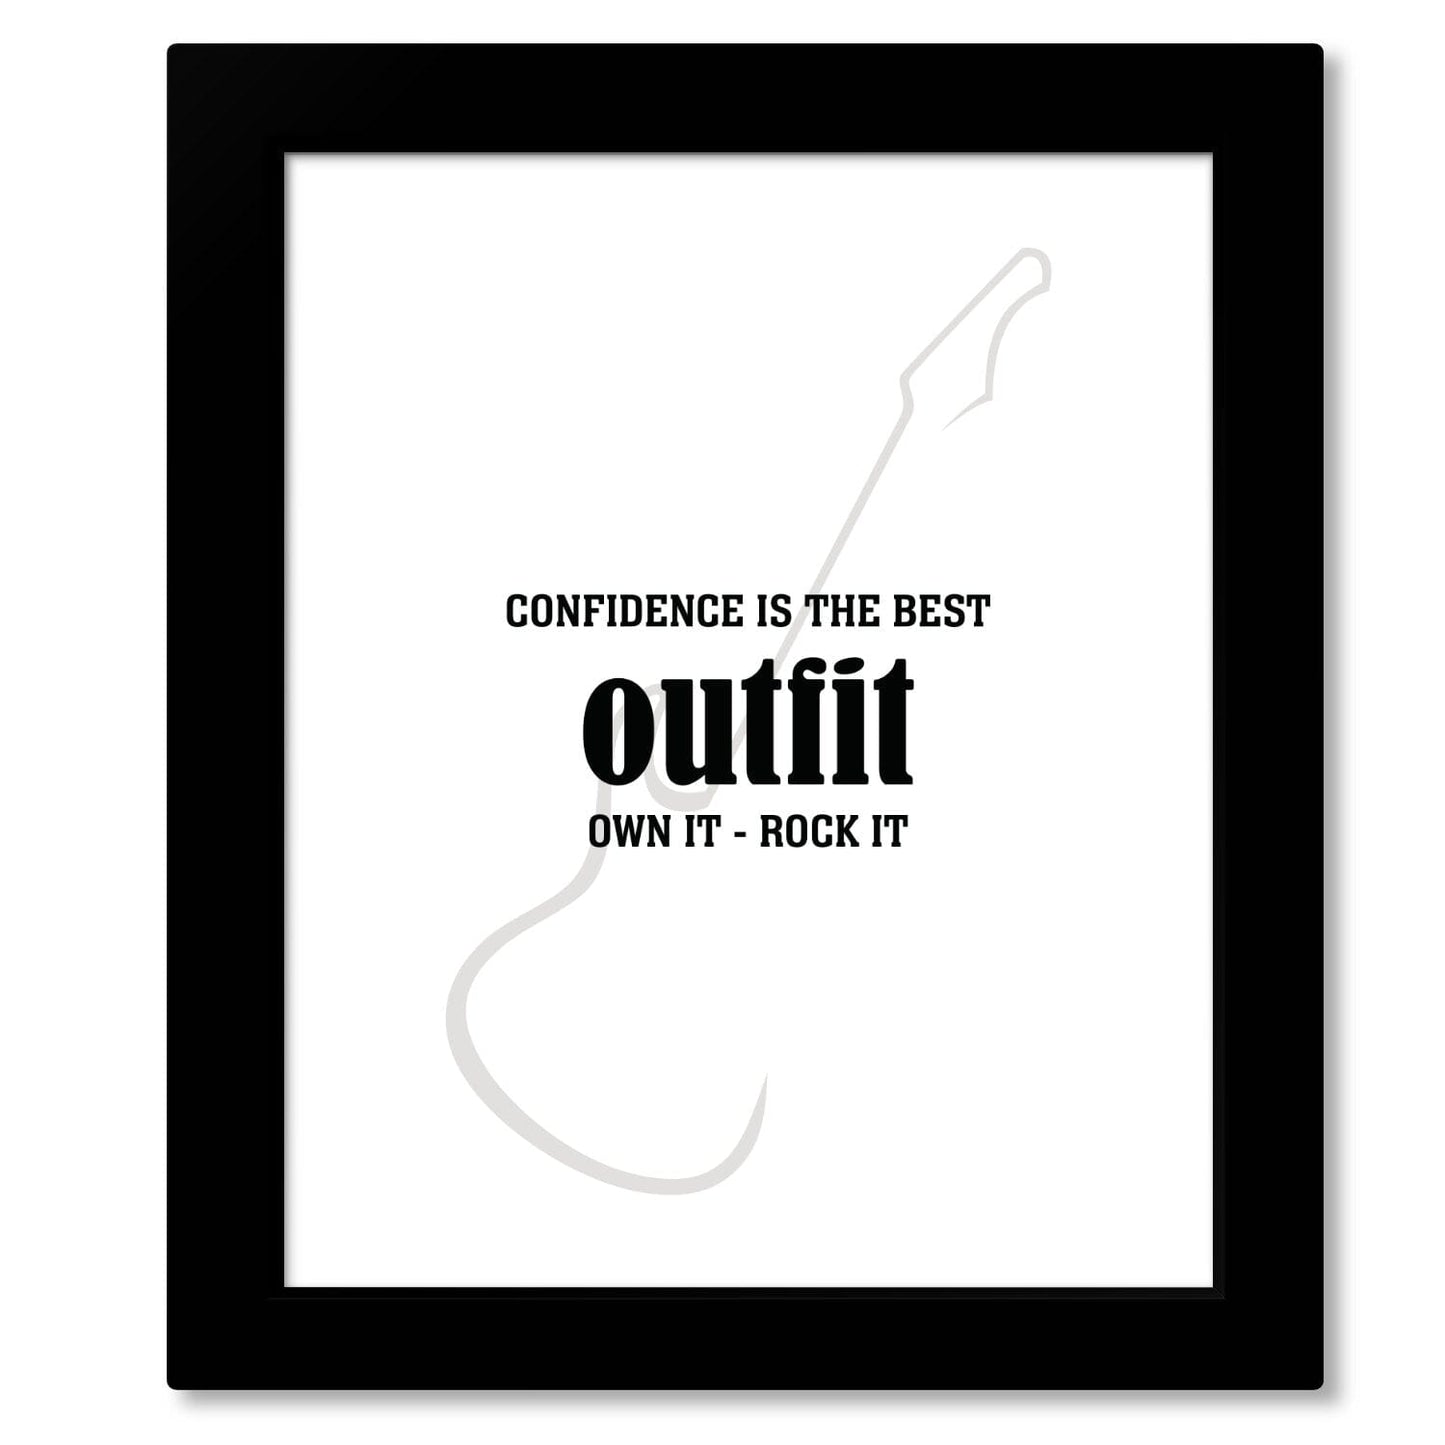 Wise & Witty Art - Confidence is the Best Outfit Own It Rock It Wise and Wiseass Quotes Song Lyrics Art 8x10 Framed Print 